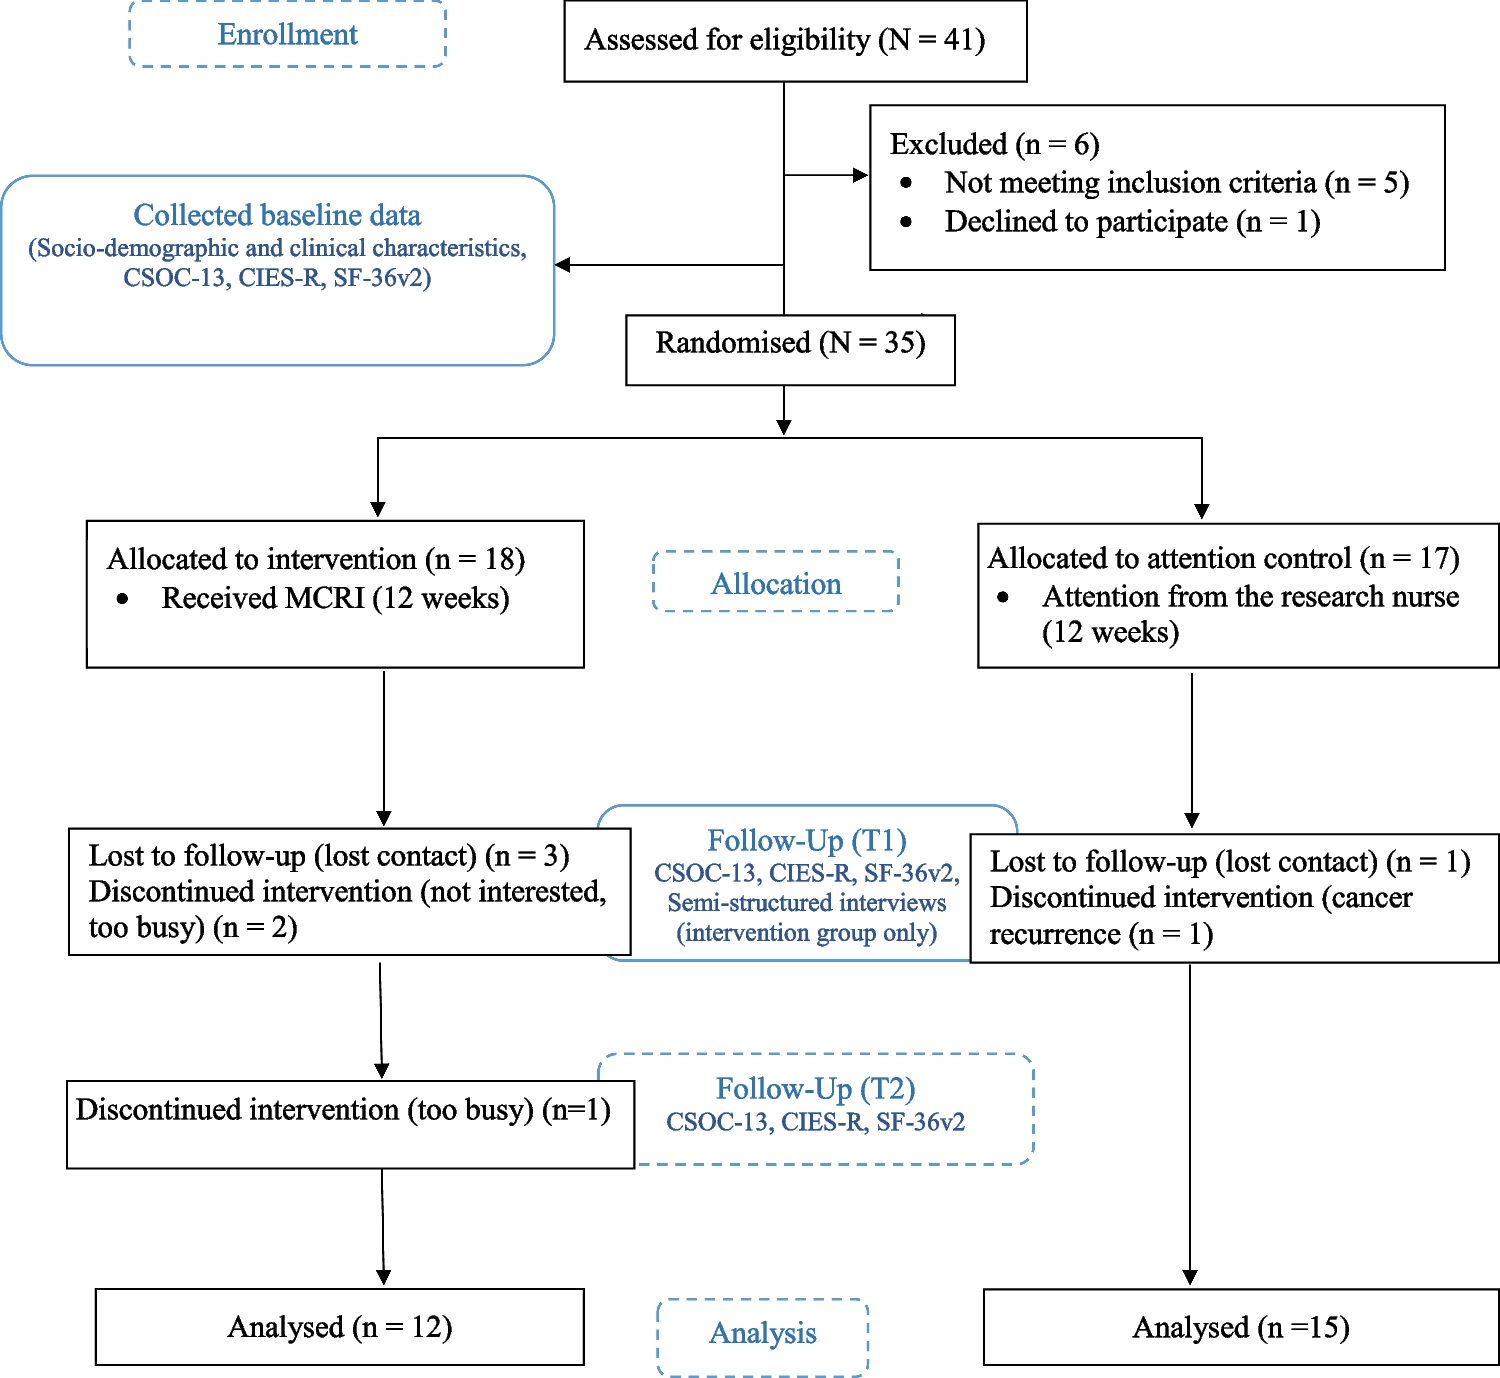 A multimodal cancer rehabilitation programme promoting sense of coherence for women treated for female reproductive cancers: a pilot randomised controlled trial